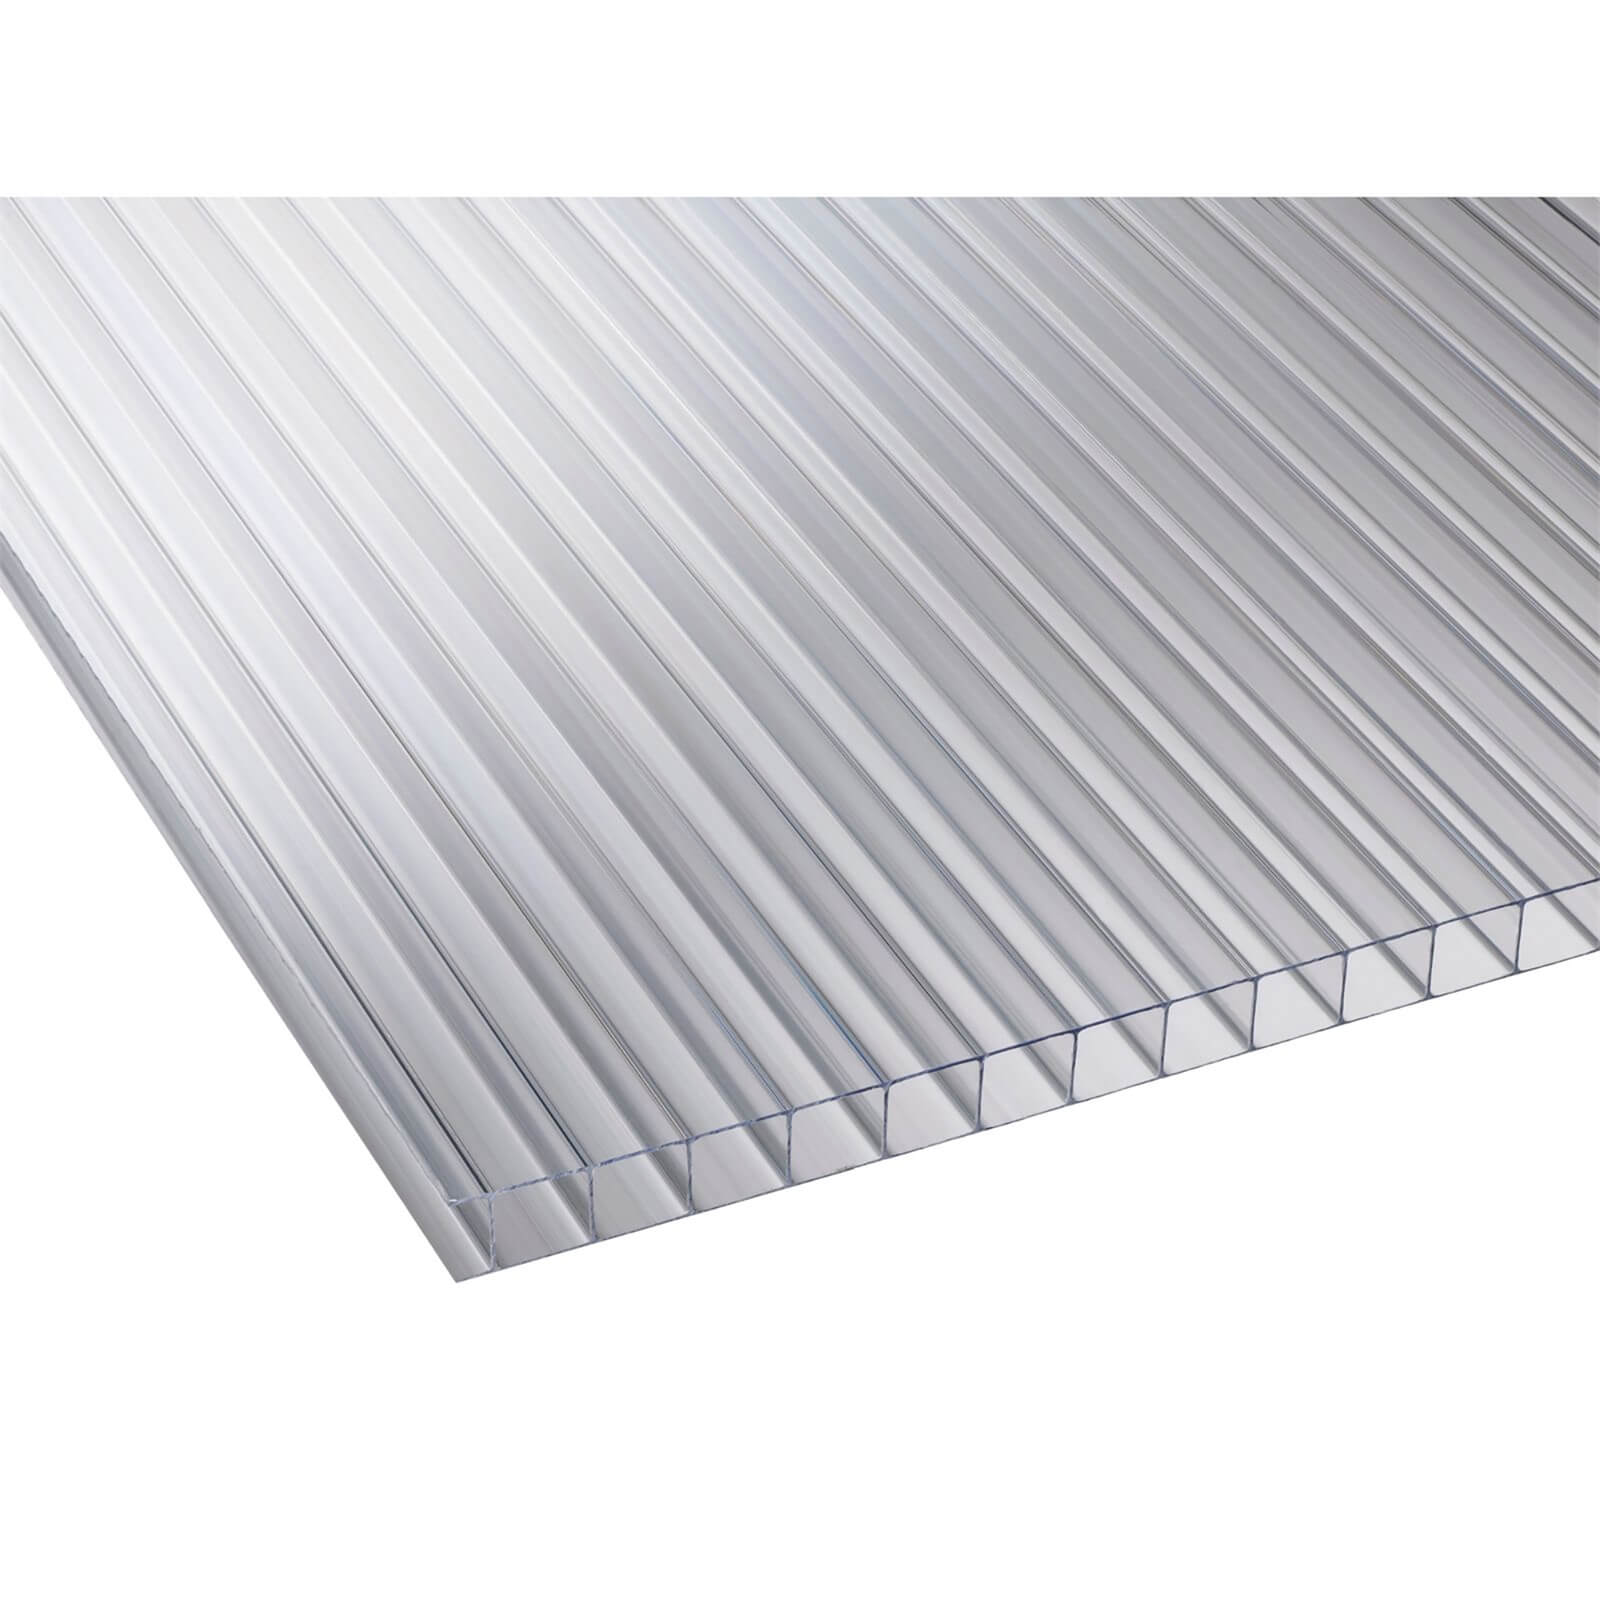 Photo of Corotherm Glazing & Roofing Sheet 2500x700x10mm - 3 Pack